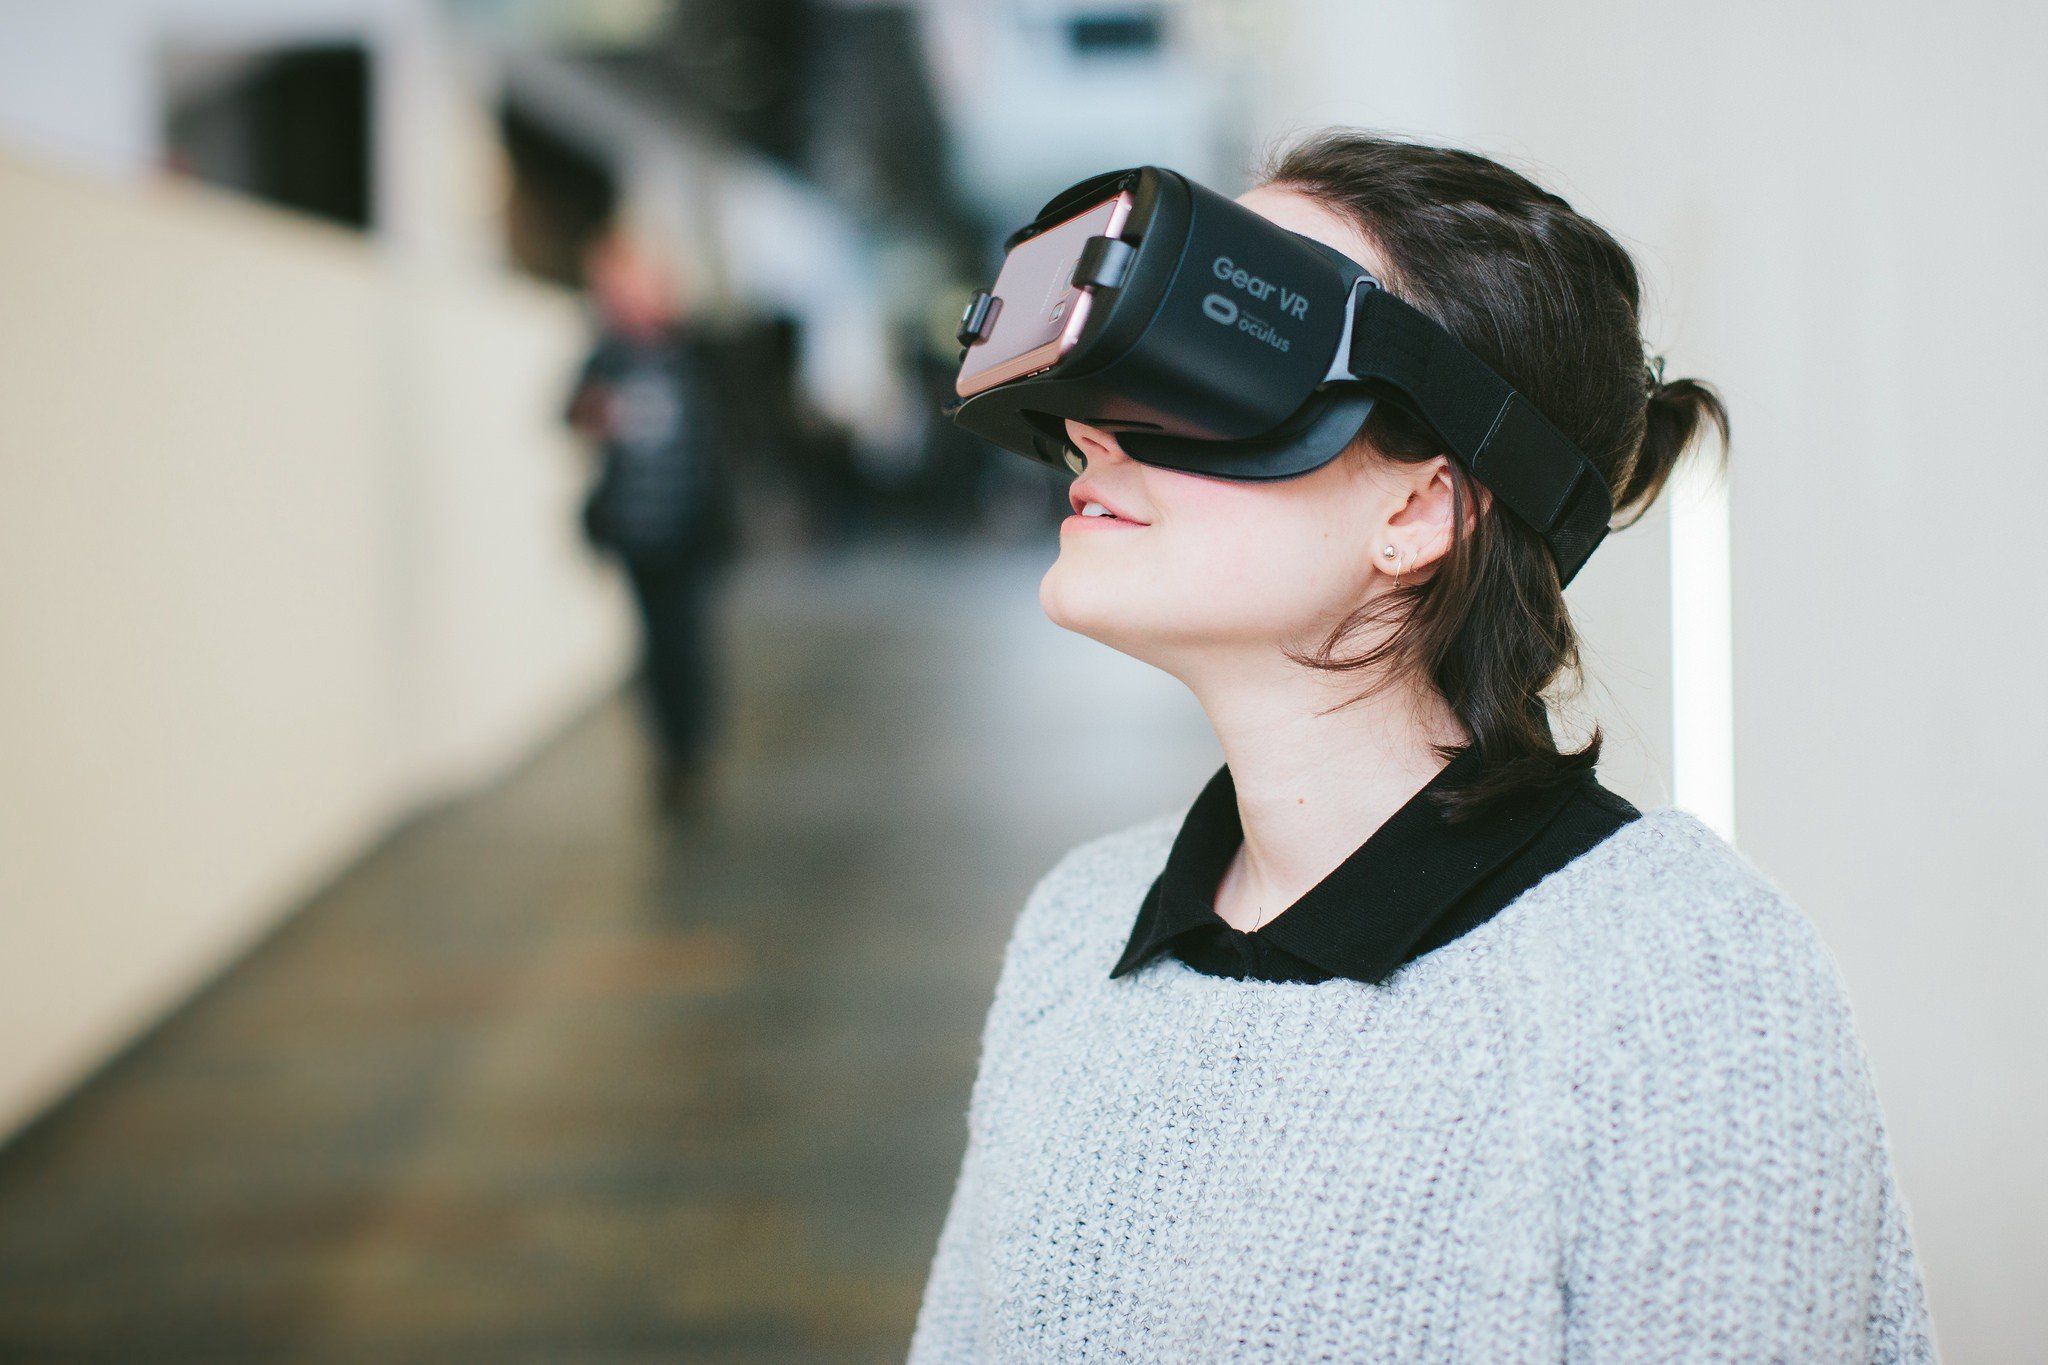 featured image - How Learning from the Physical World Can Help Us Design Virtual Reality Experiences